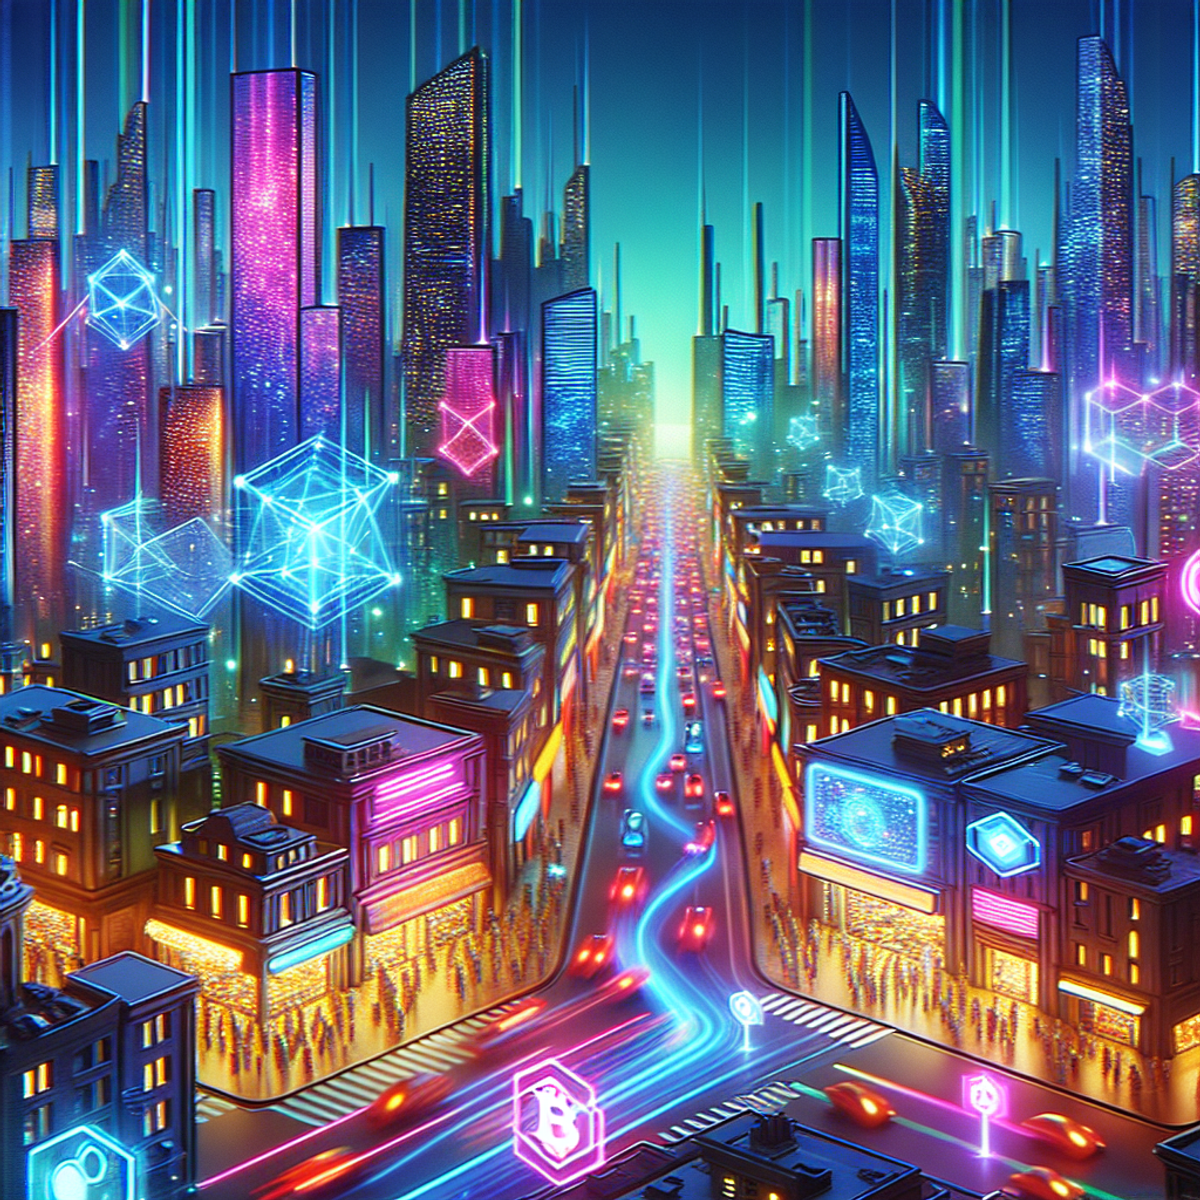 Futuristic cityscape with glowing neon skyscrapers and bustling virtual marketplace.